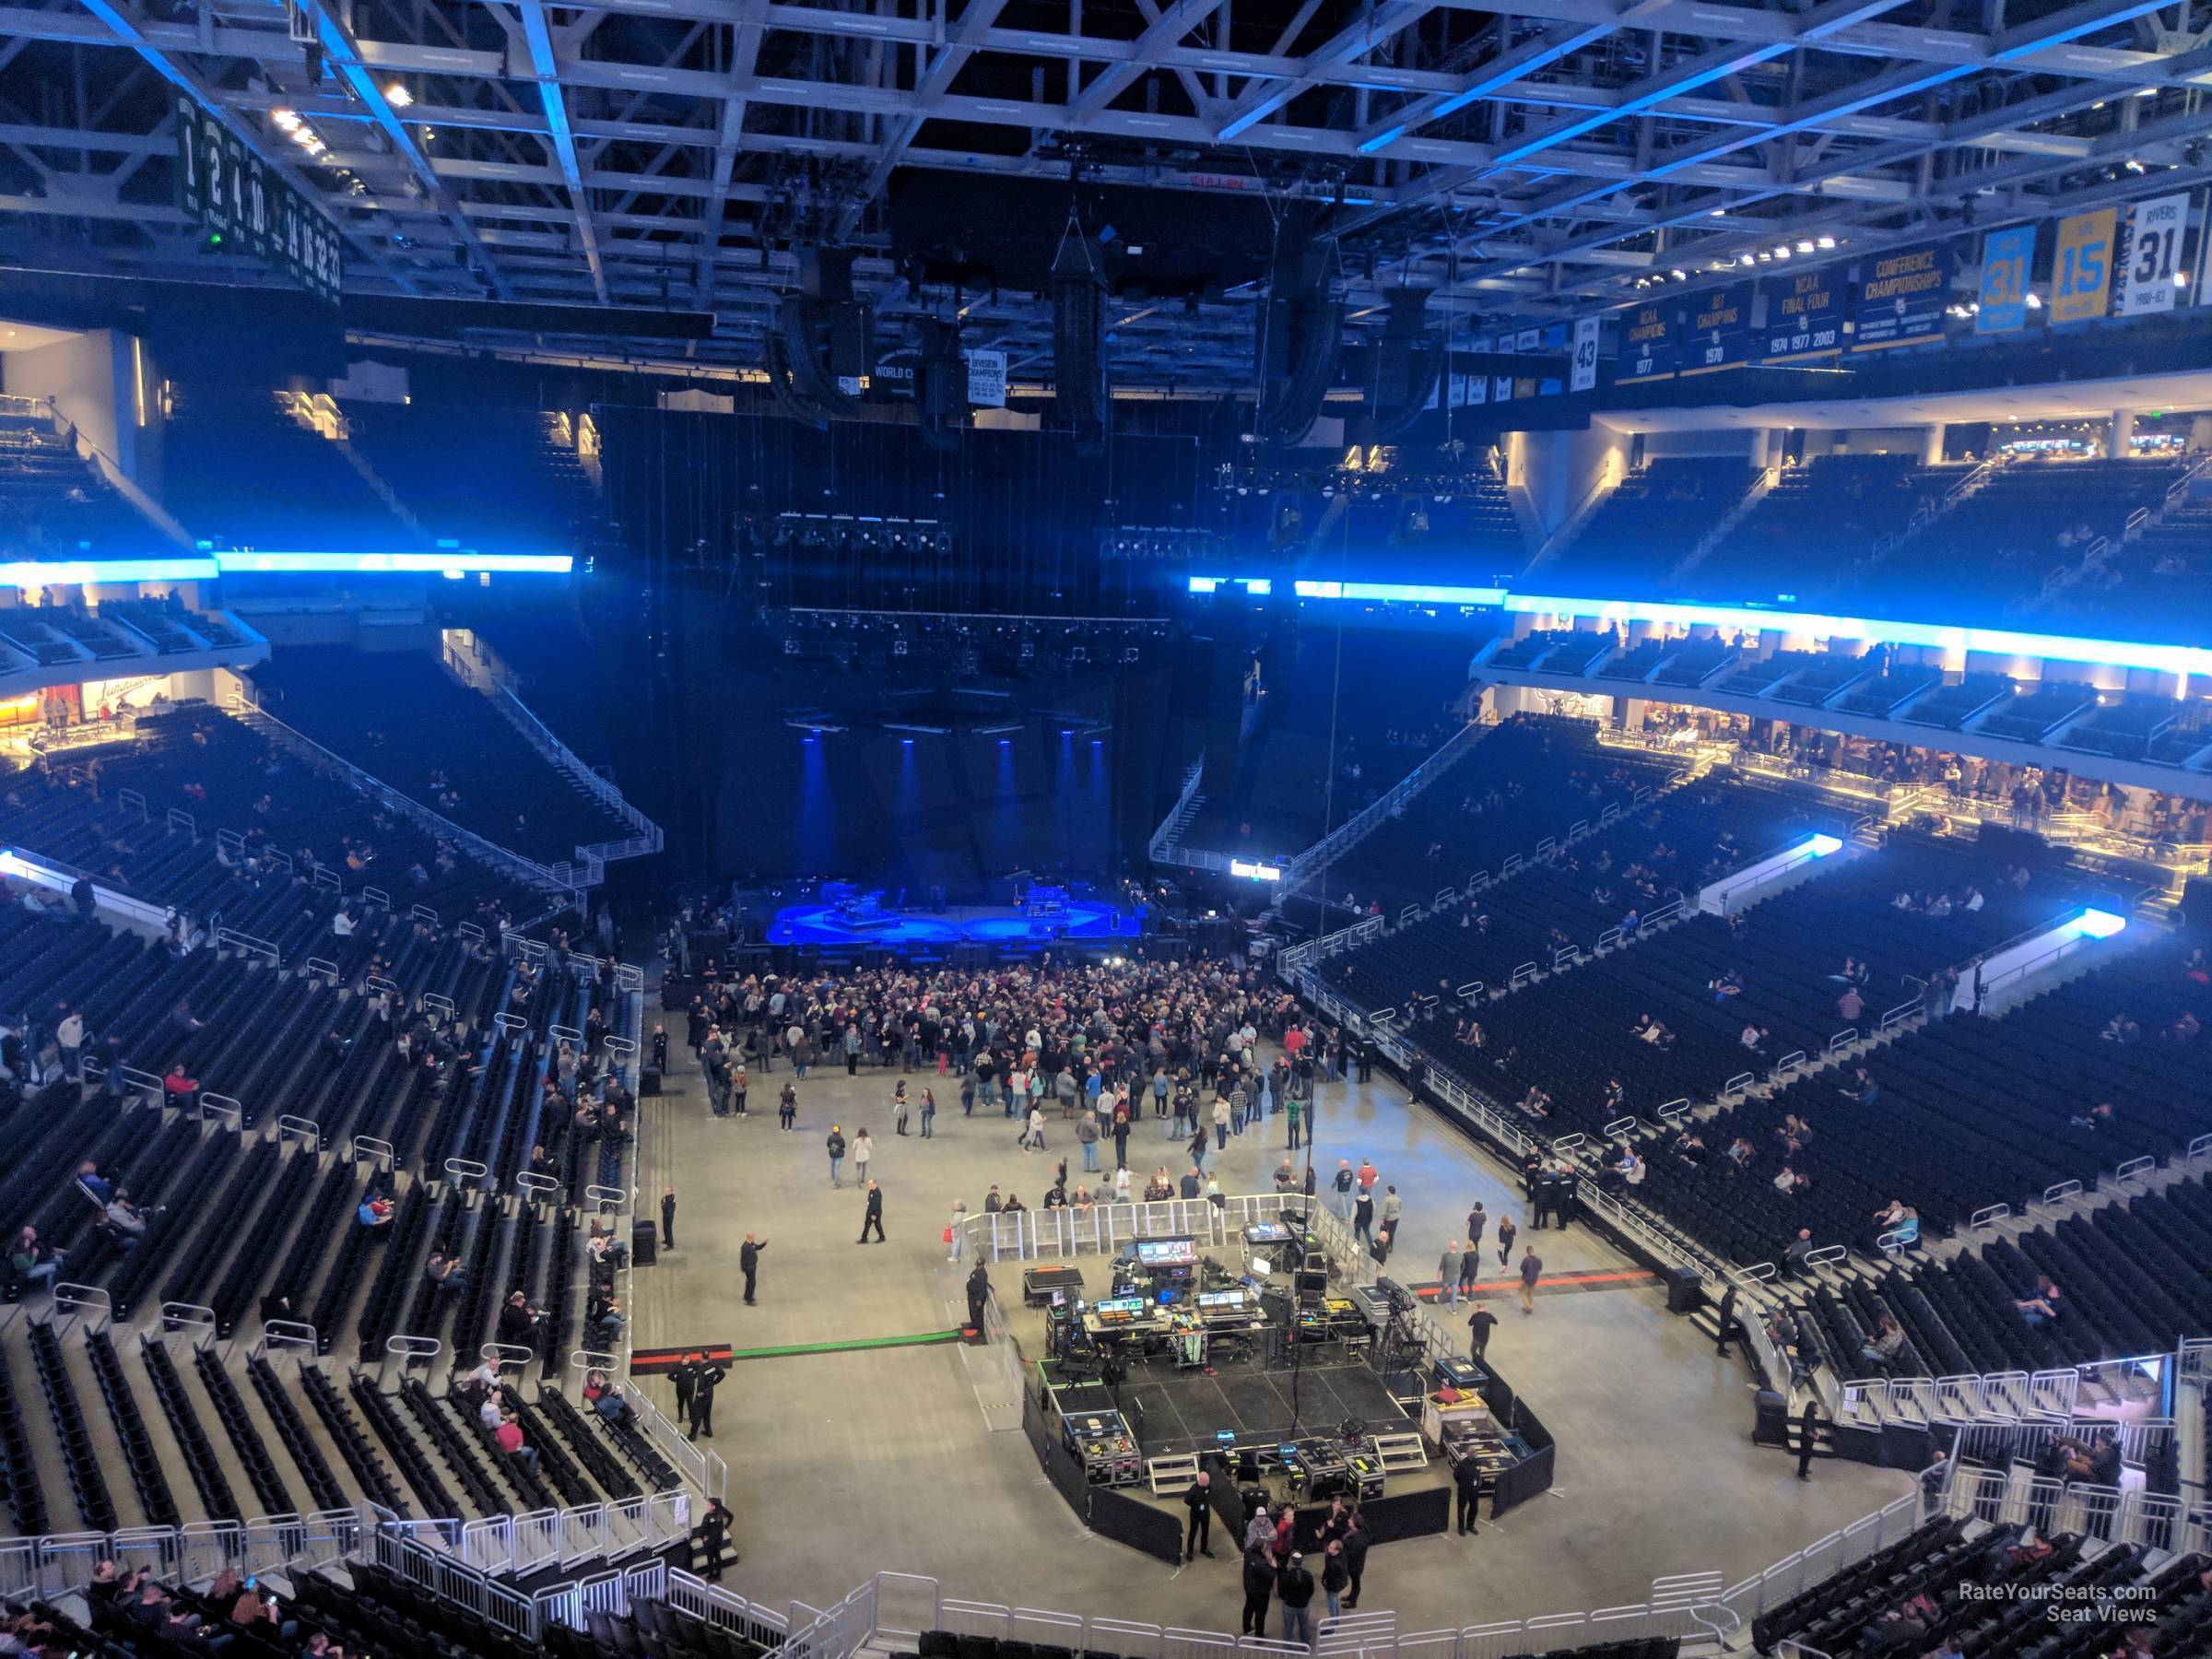 section 202, row 3 seat view  for concert - fiserv forum